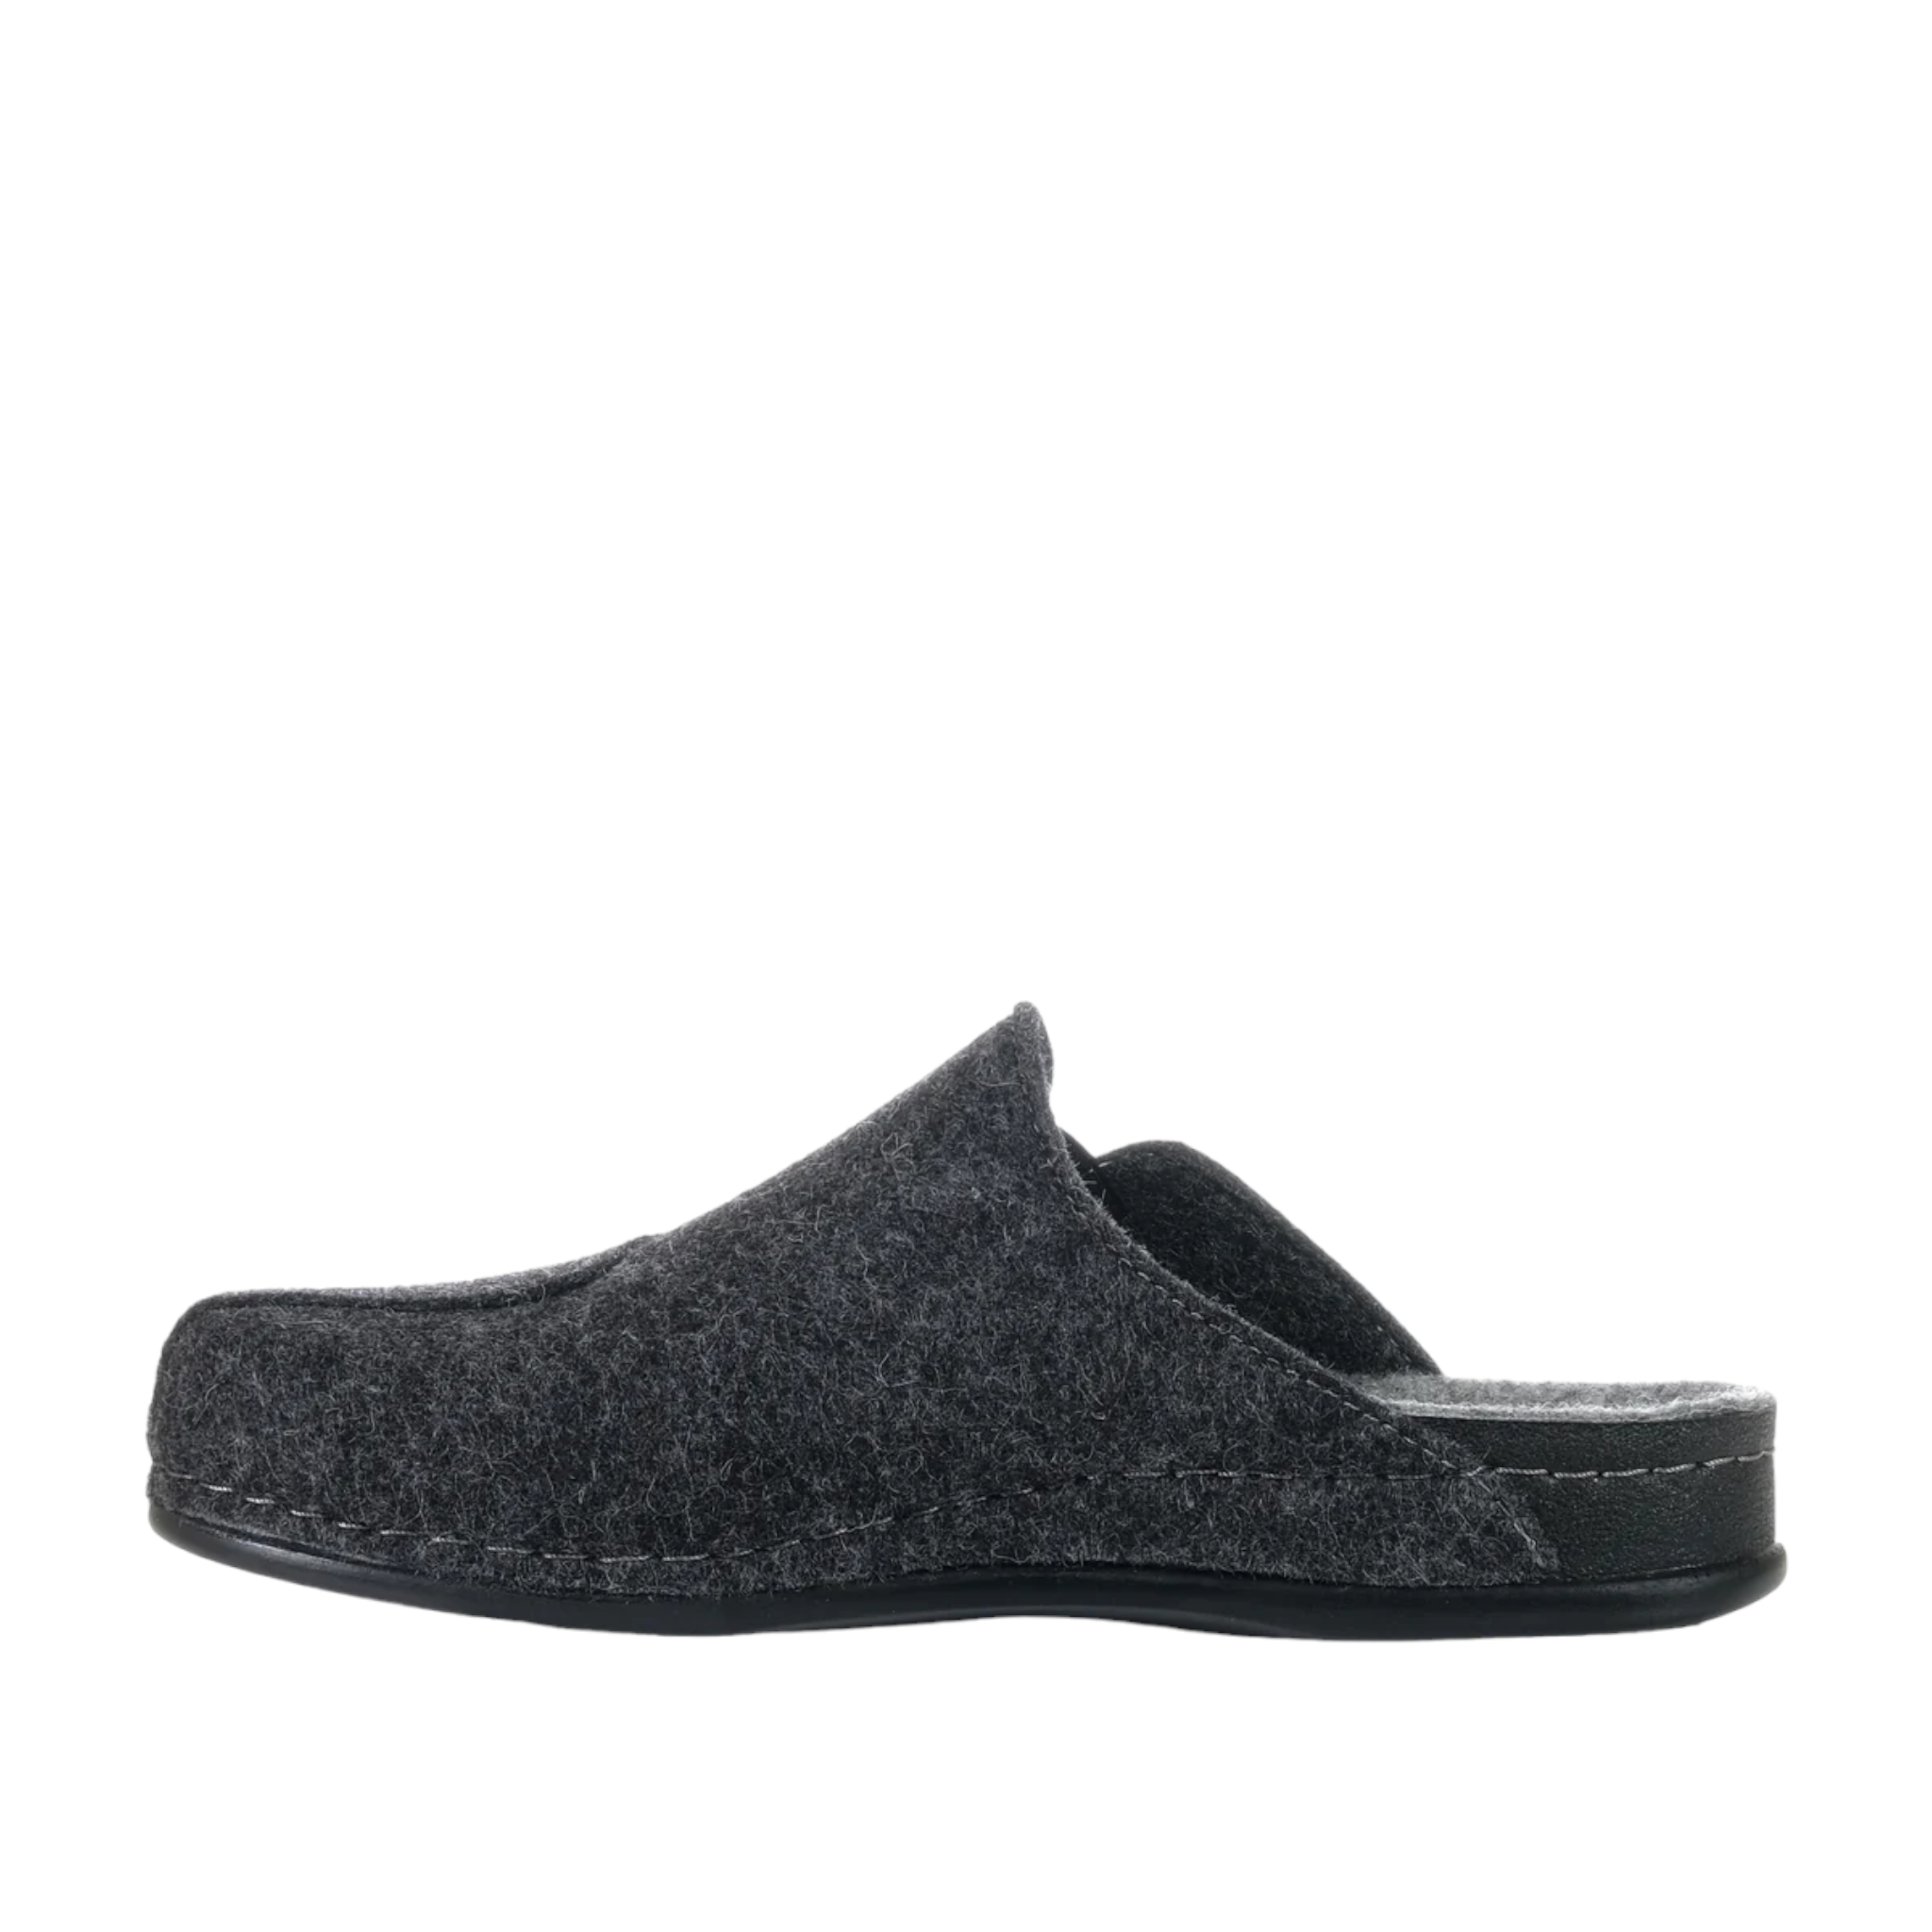 Shop Mens Felt Mule Slippers Online and In-store. Dark Grey felt with light grey inner sole. Slight Gusset on out side of upper. Shop Online and In-Store with shoe&me